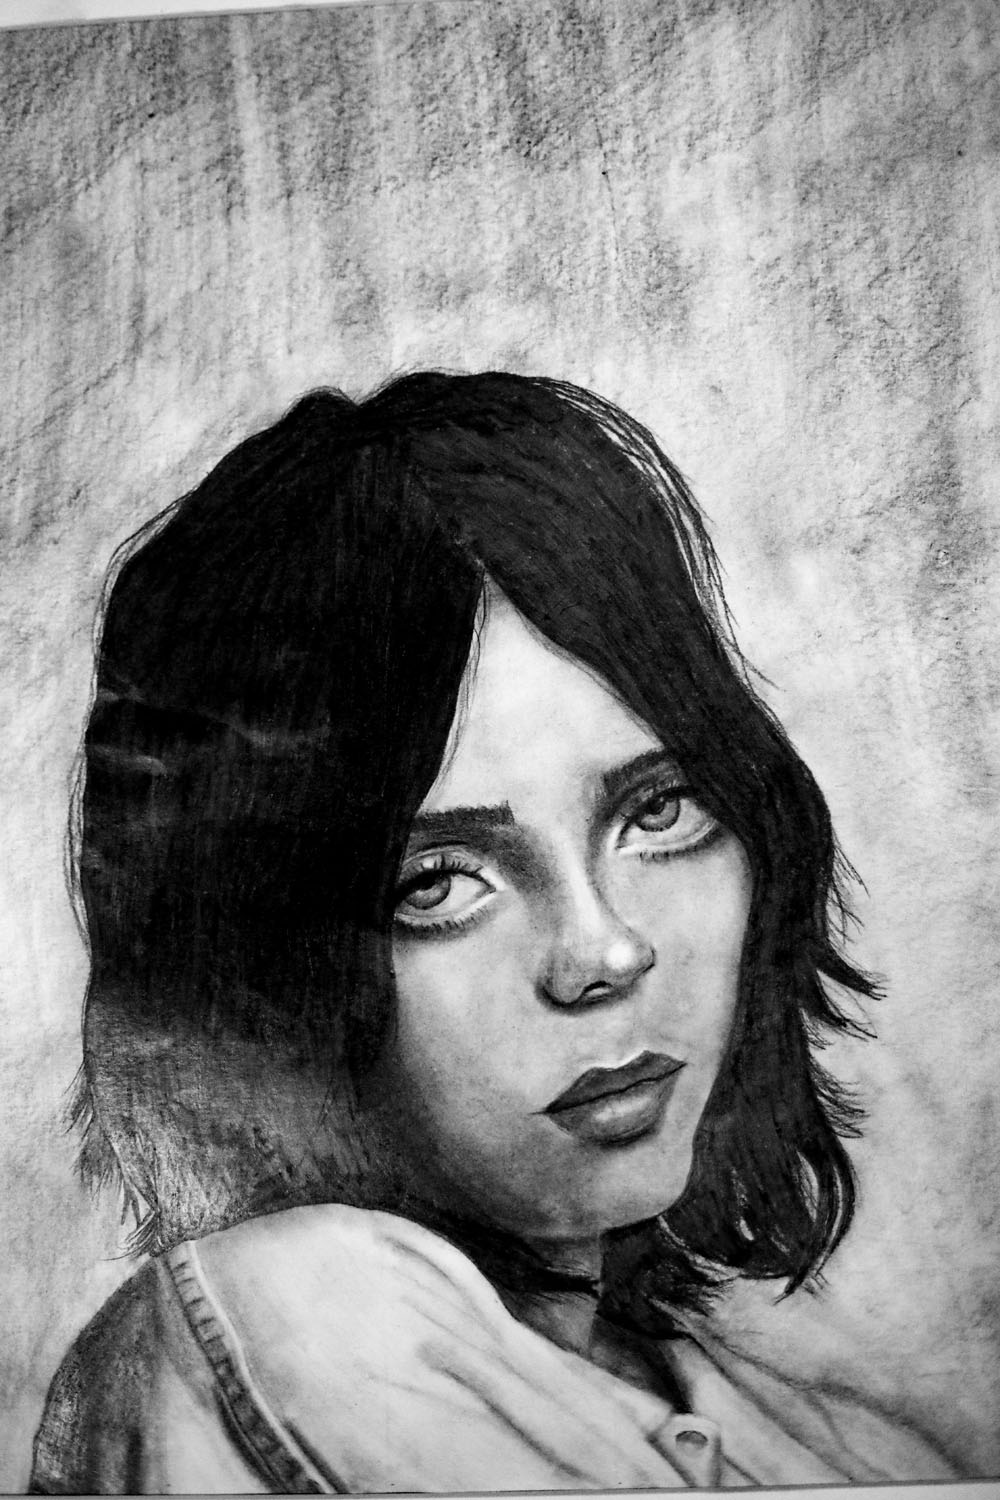 Pencil drawing of a girl with dark hair